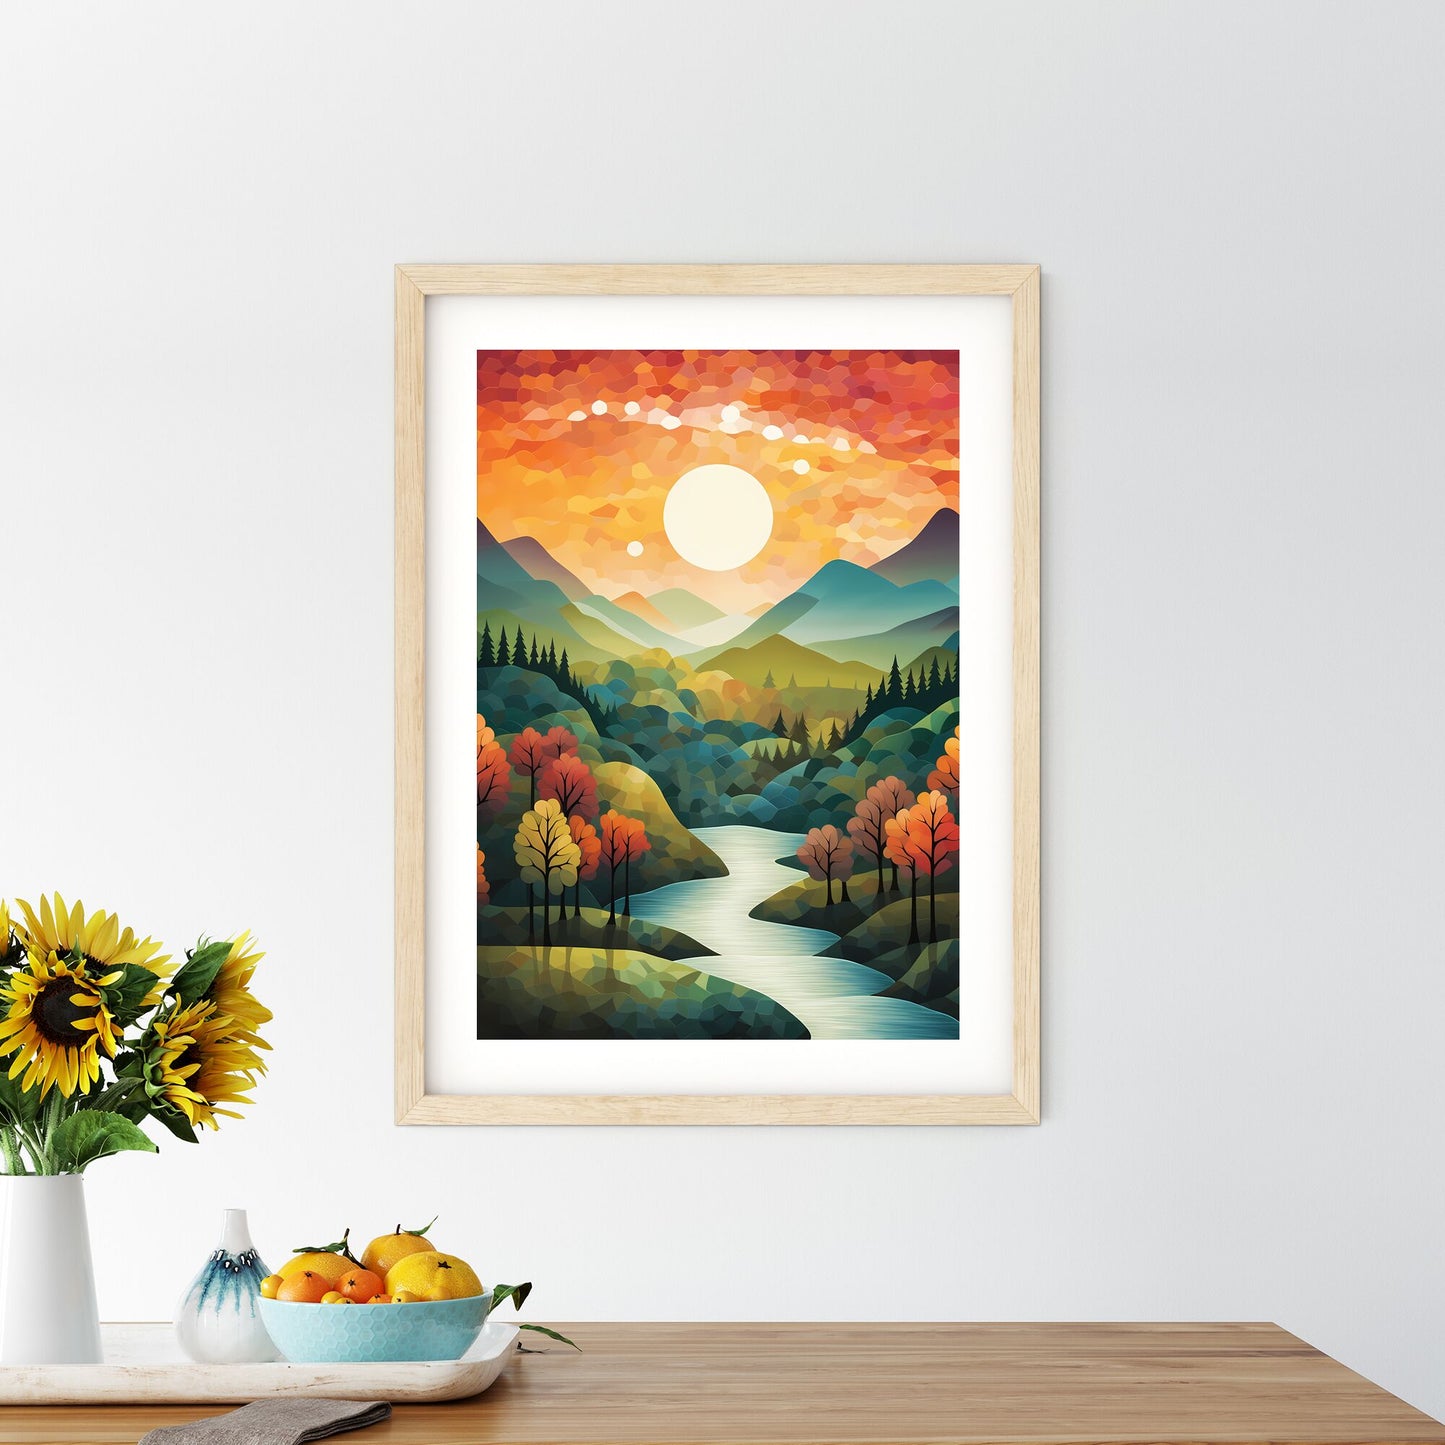 River Running Through A Valley With Trees And Mountains Art Print Default Title